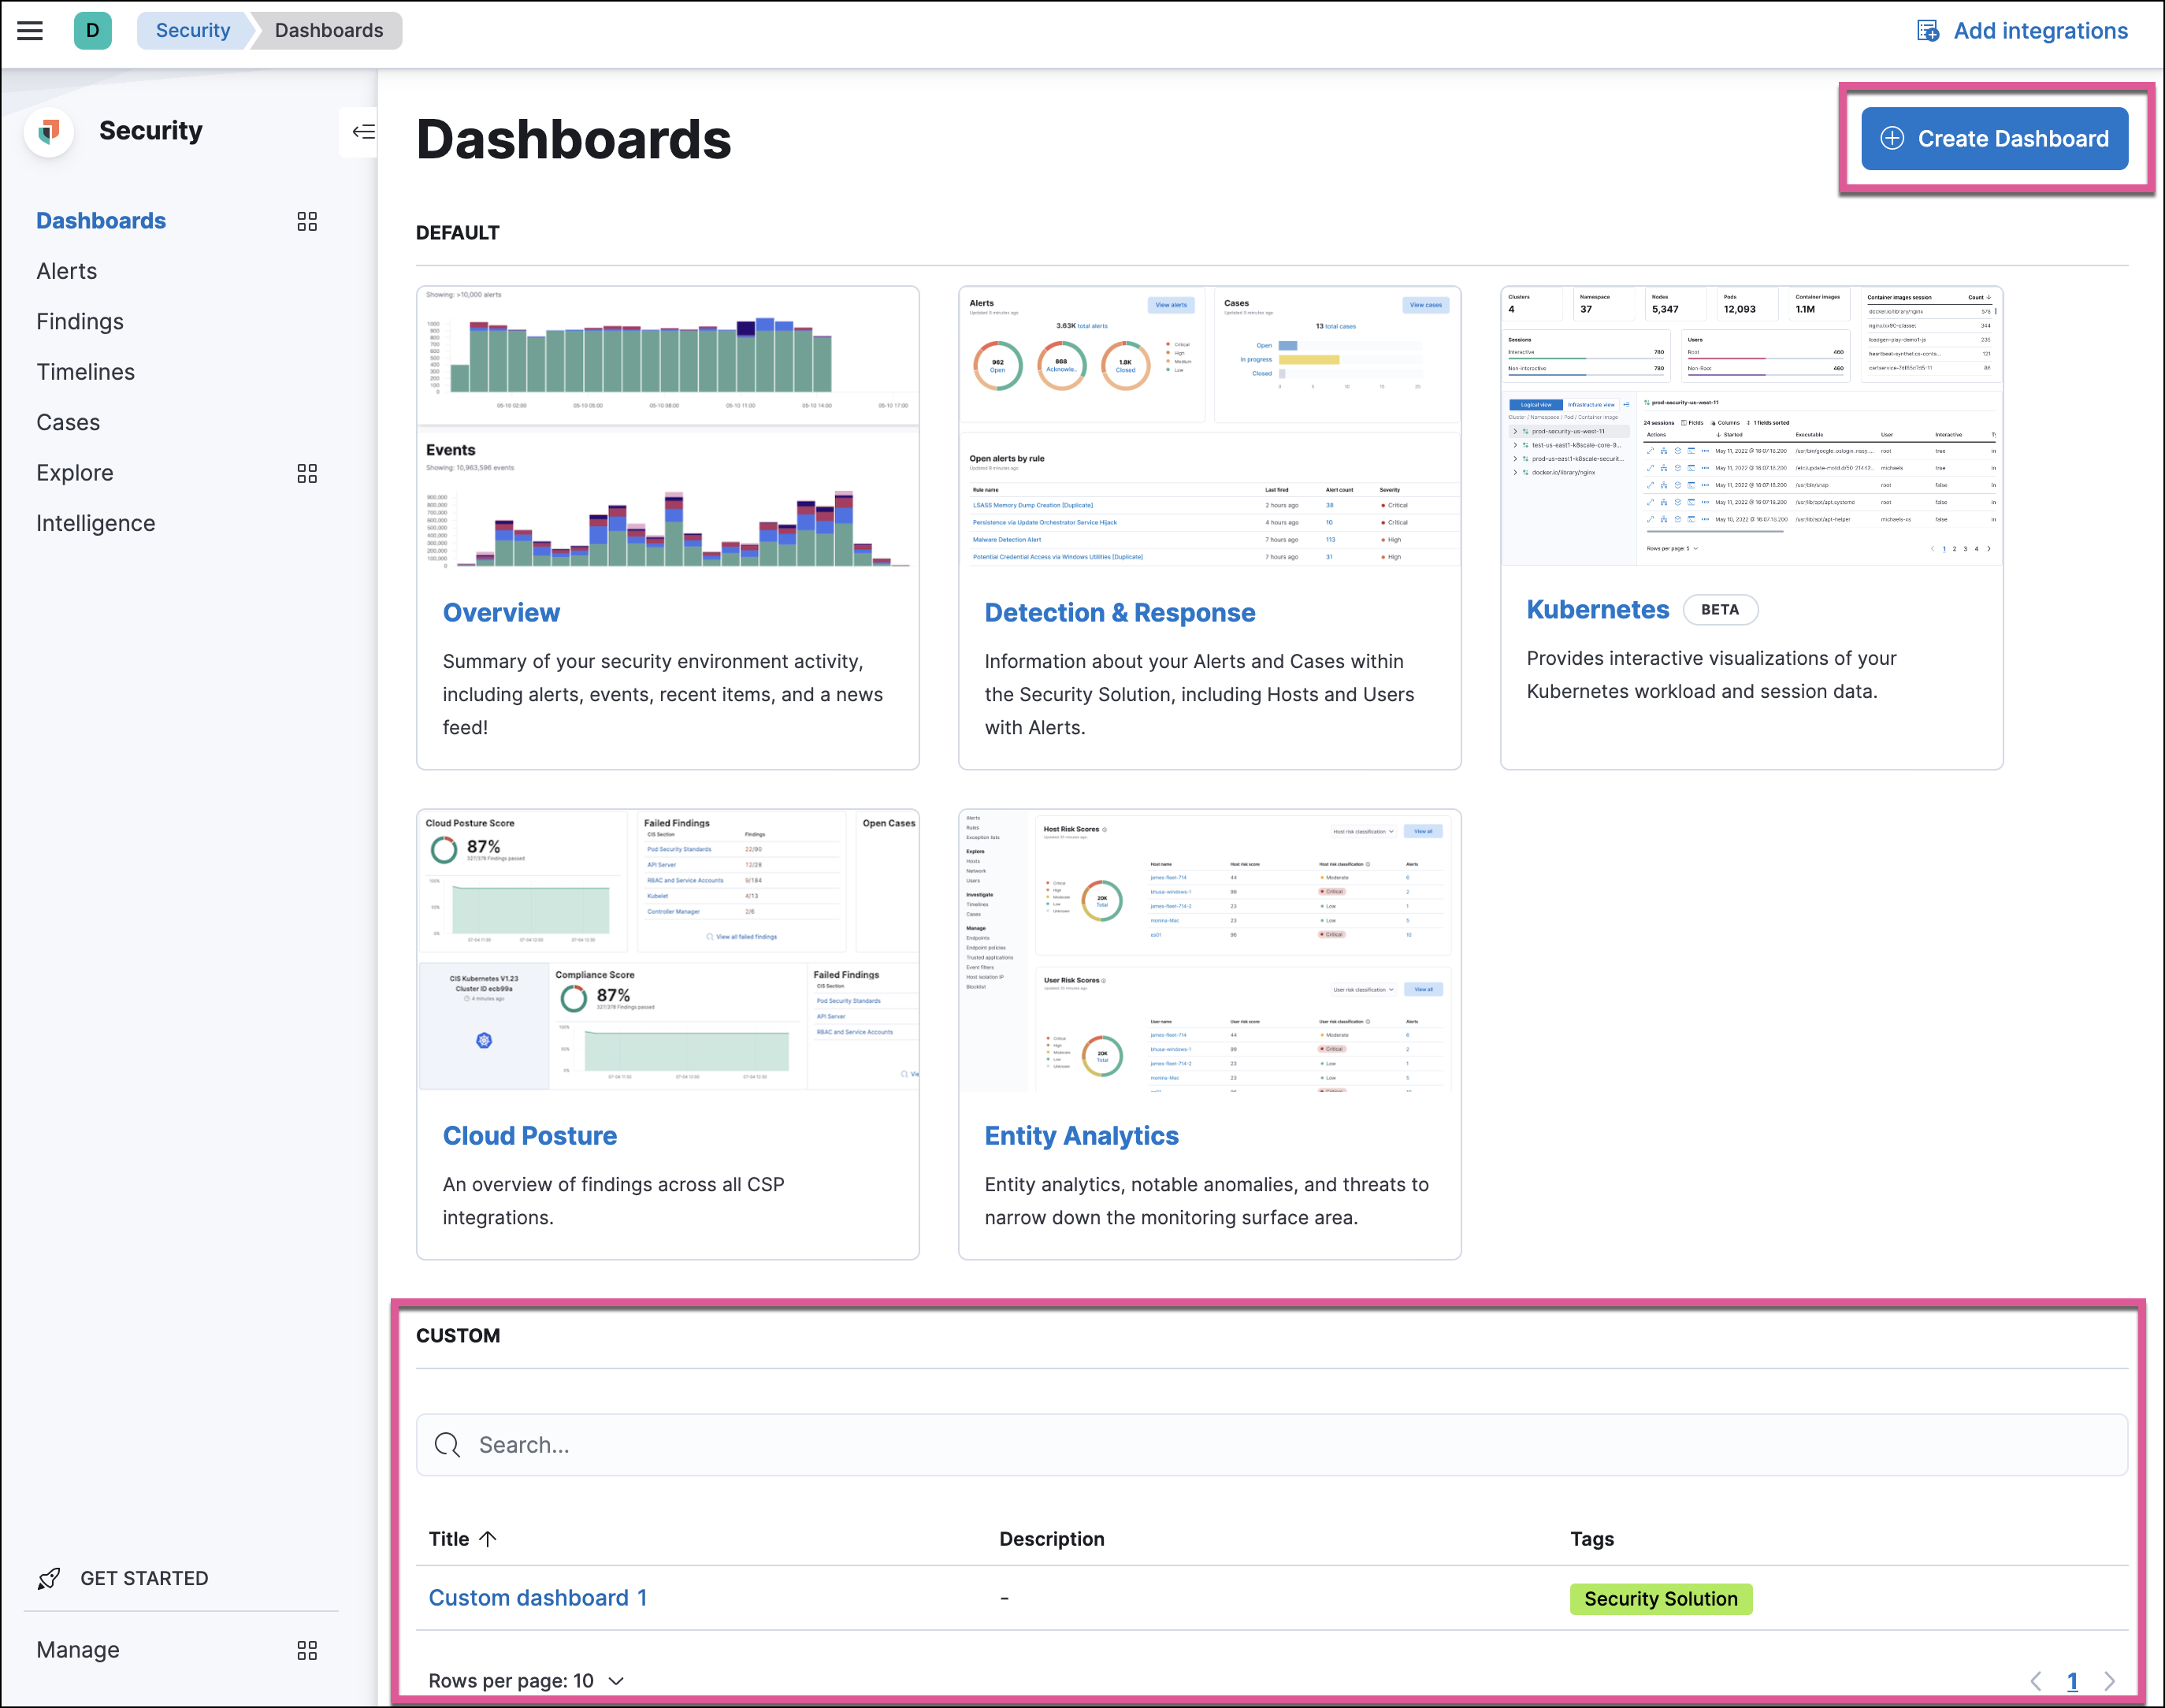 The dashboards landing page